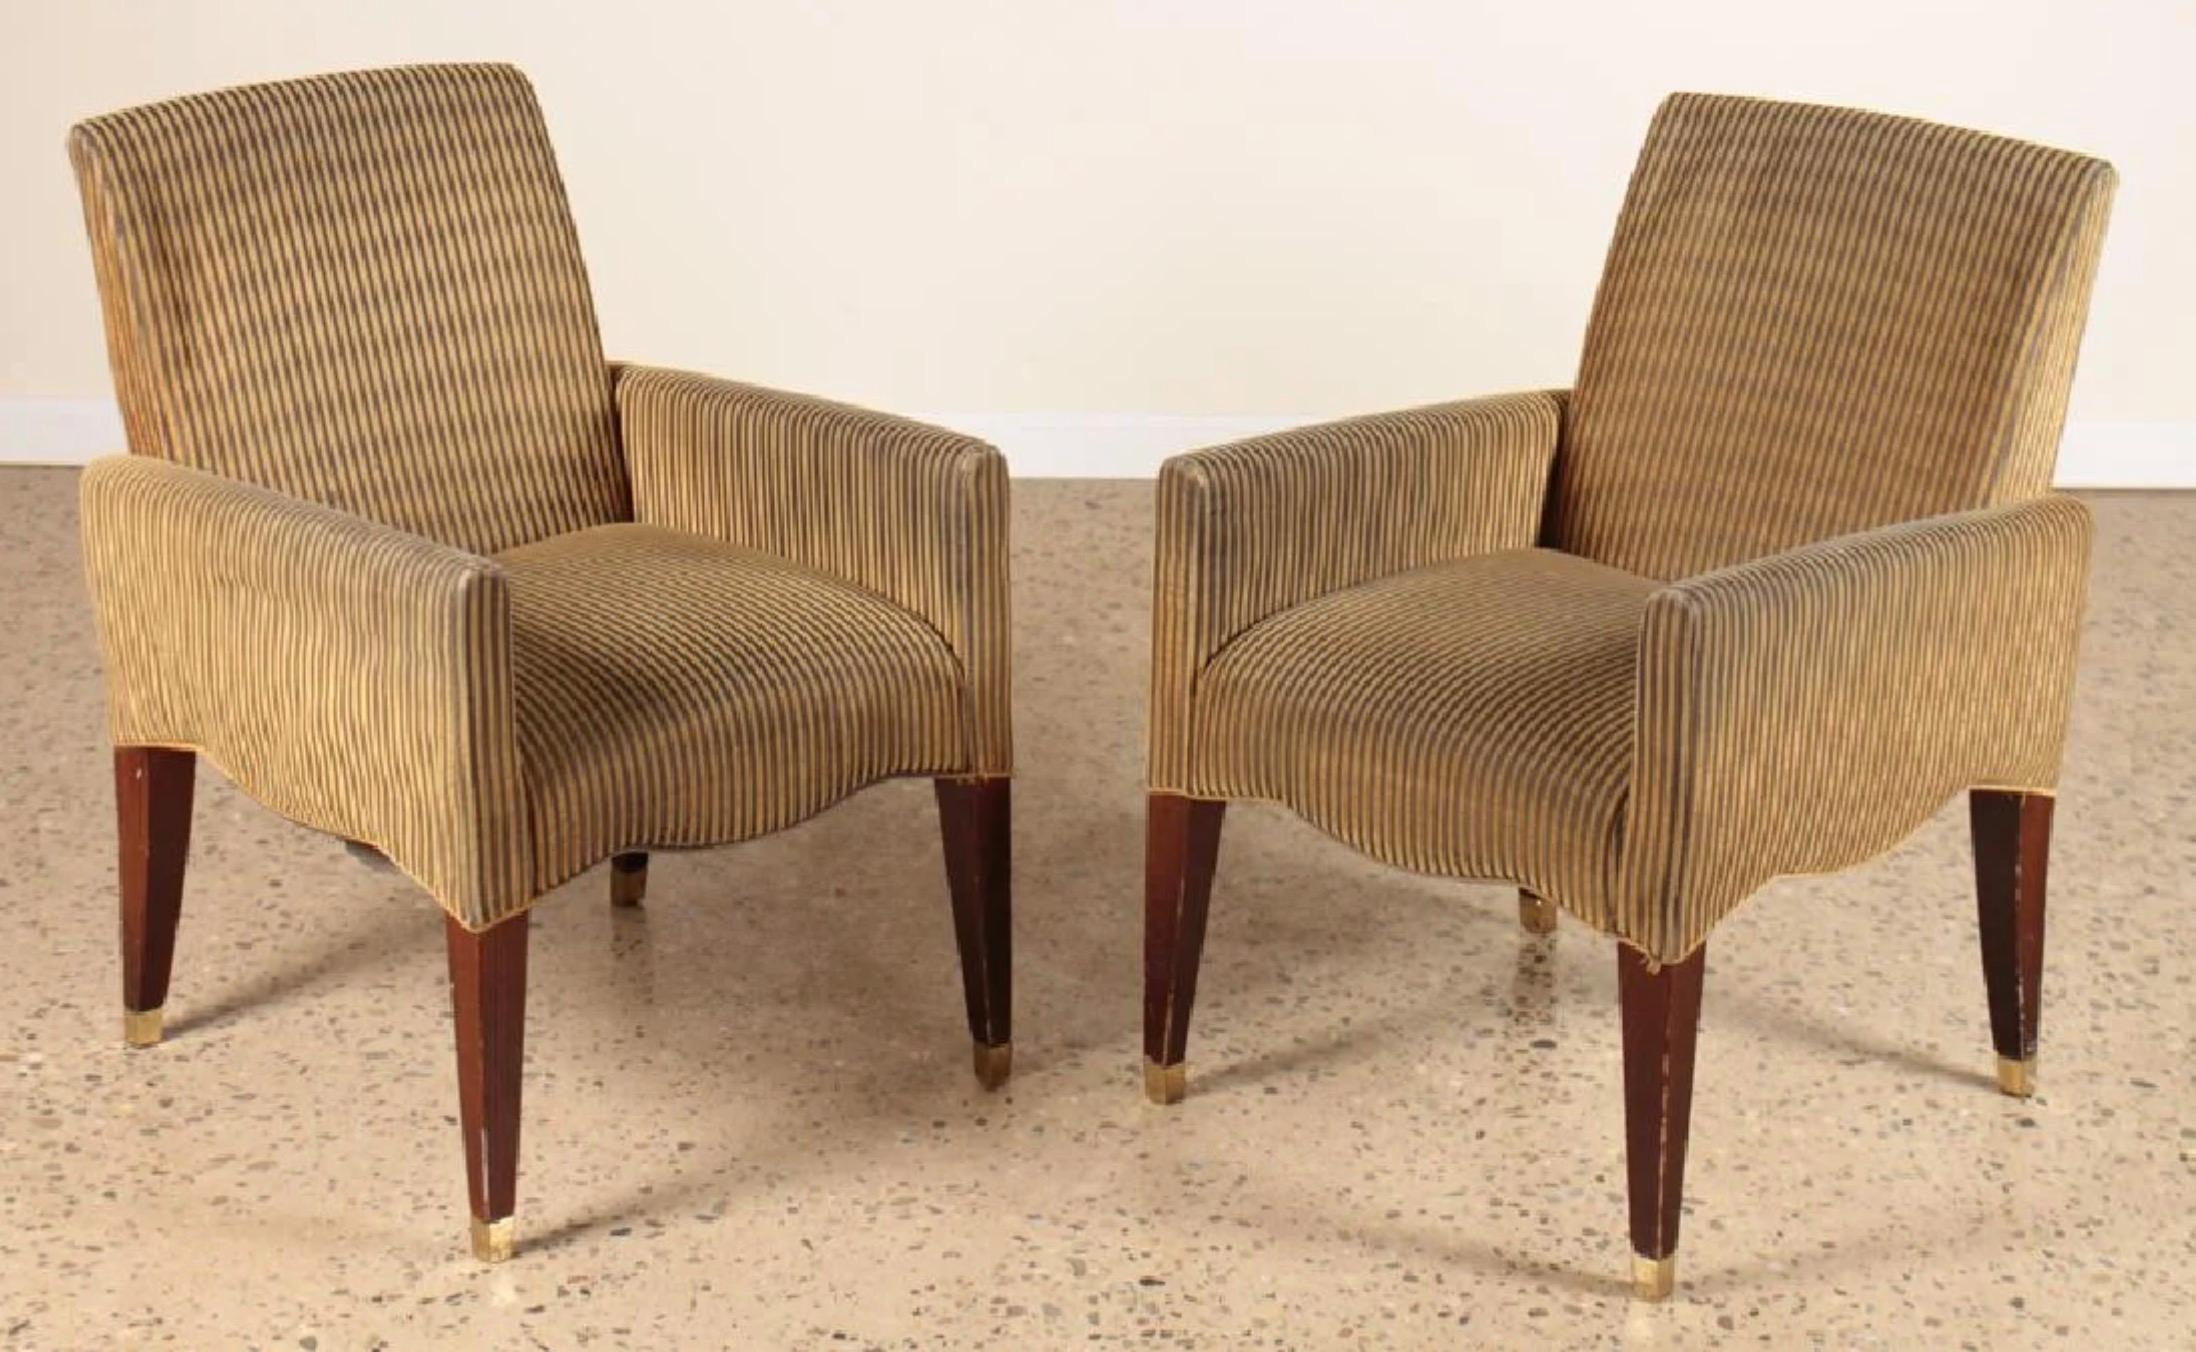 Olivier Gagnère gold striped velvet armchairs. Brass ring detail on chair back, and brass foot cap. Set of 6 chairs in total.